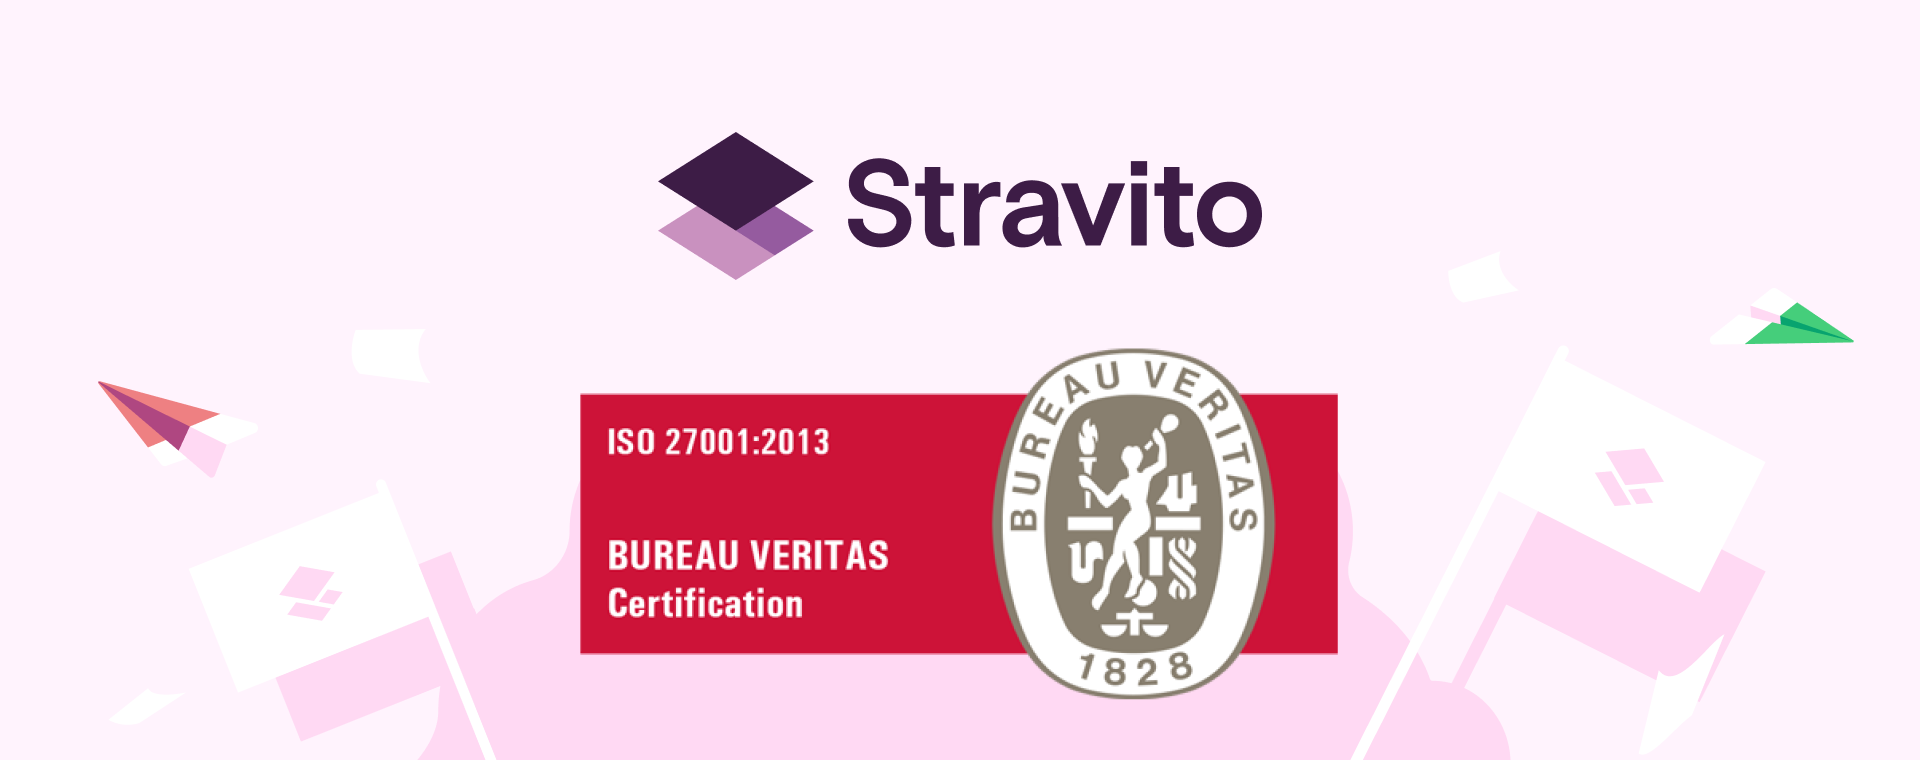 Stravito receives a silver medal in ecovadis sustainabilty rating